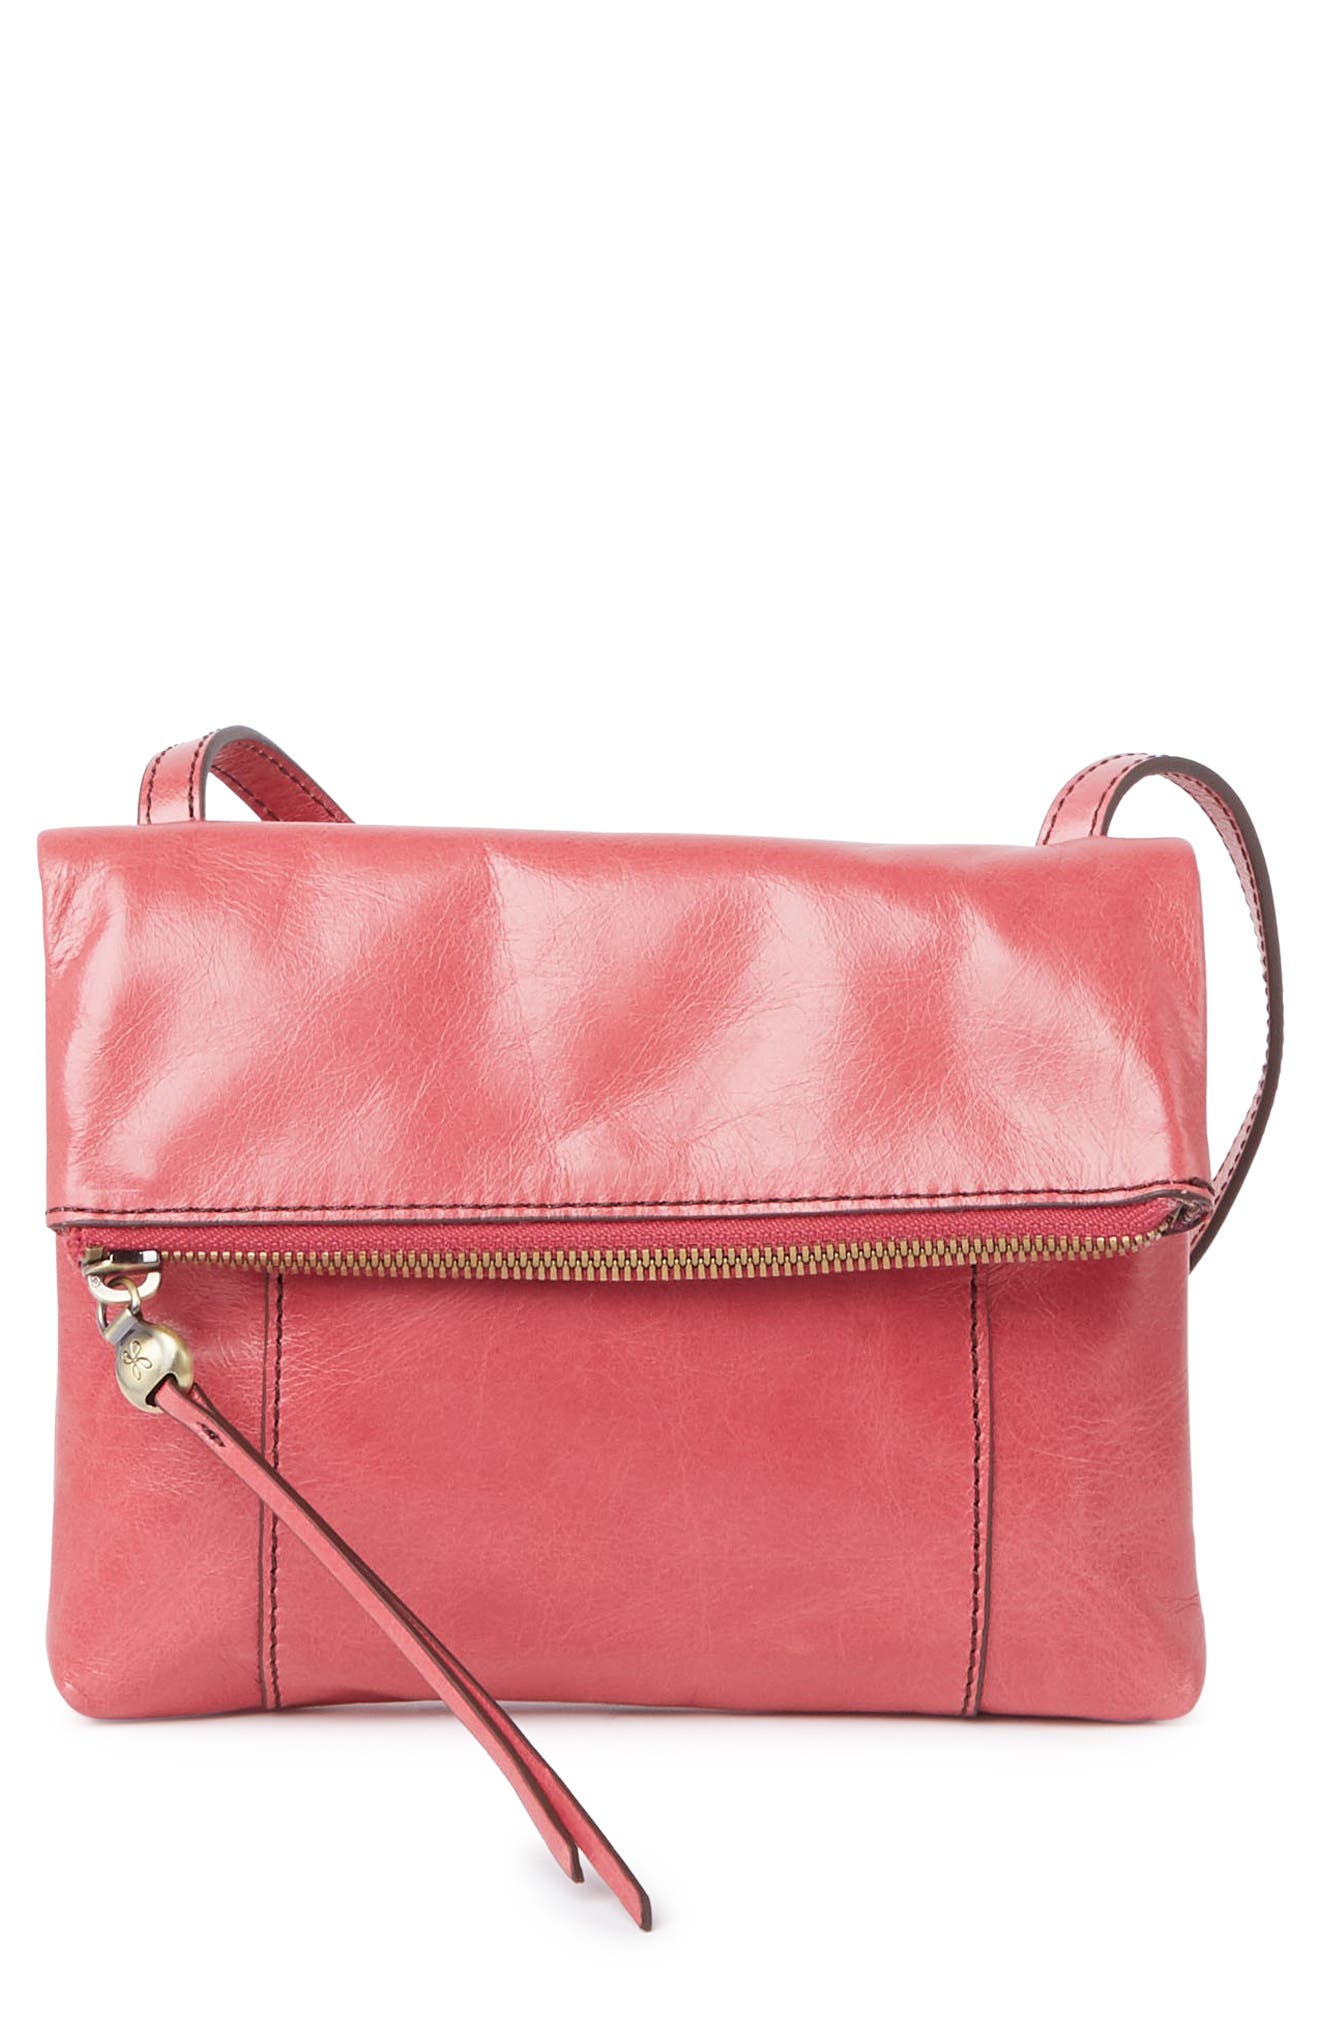 Hobo Sparrow Leather Crossbody Bag In Bright Pink3